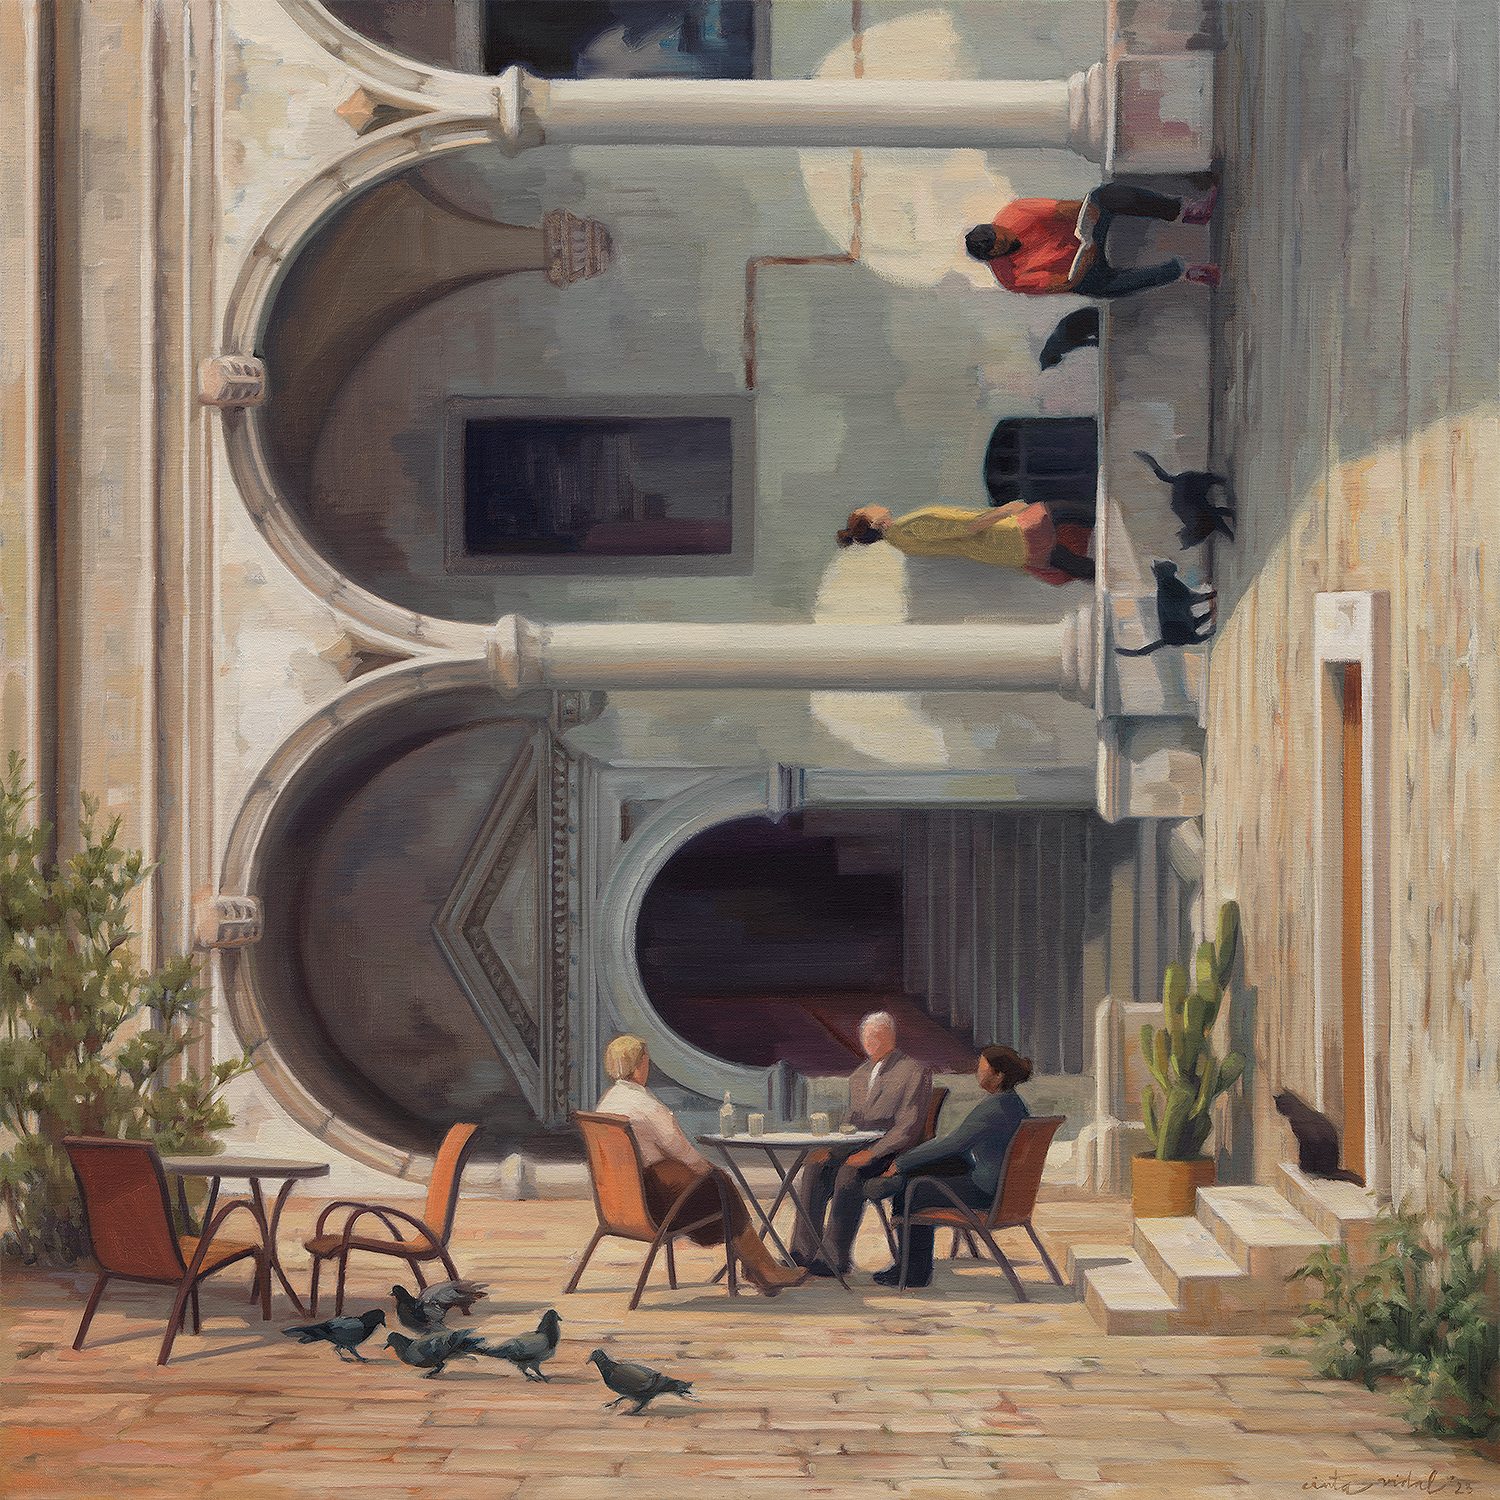 An oil painting of people sitting at a table in a Renaissance plaza, with the architecture turned sideways.